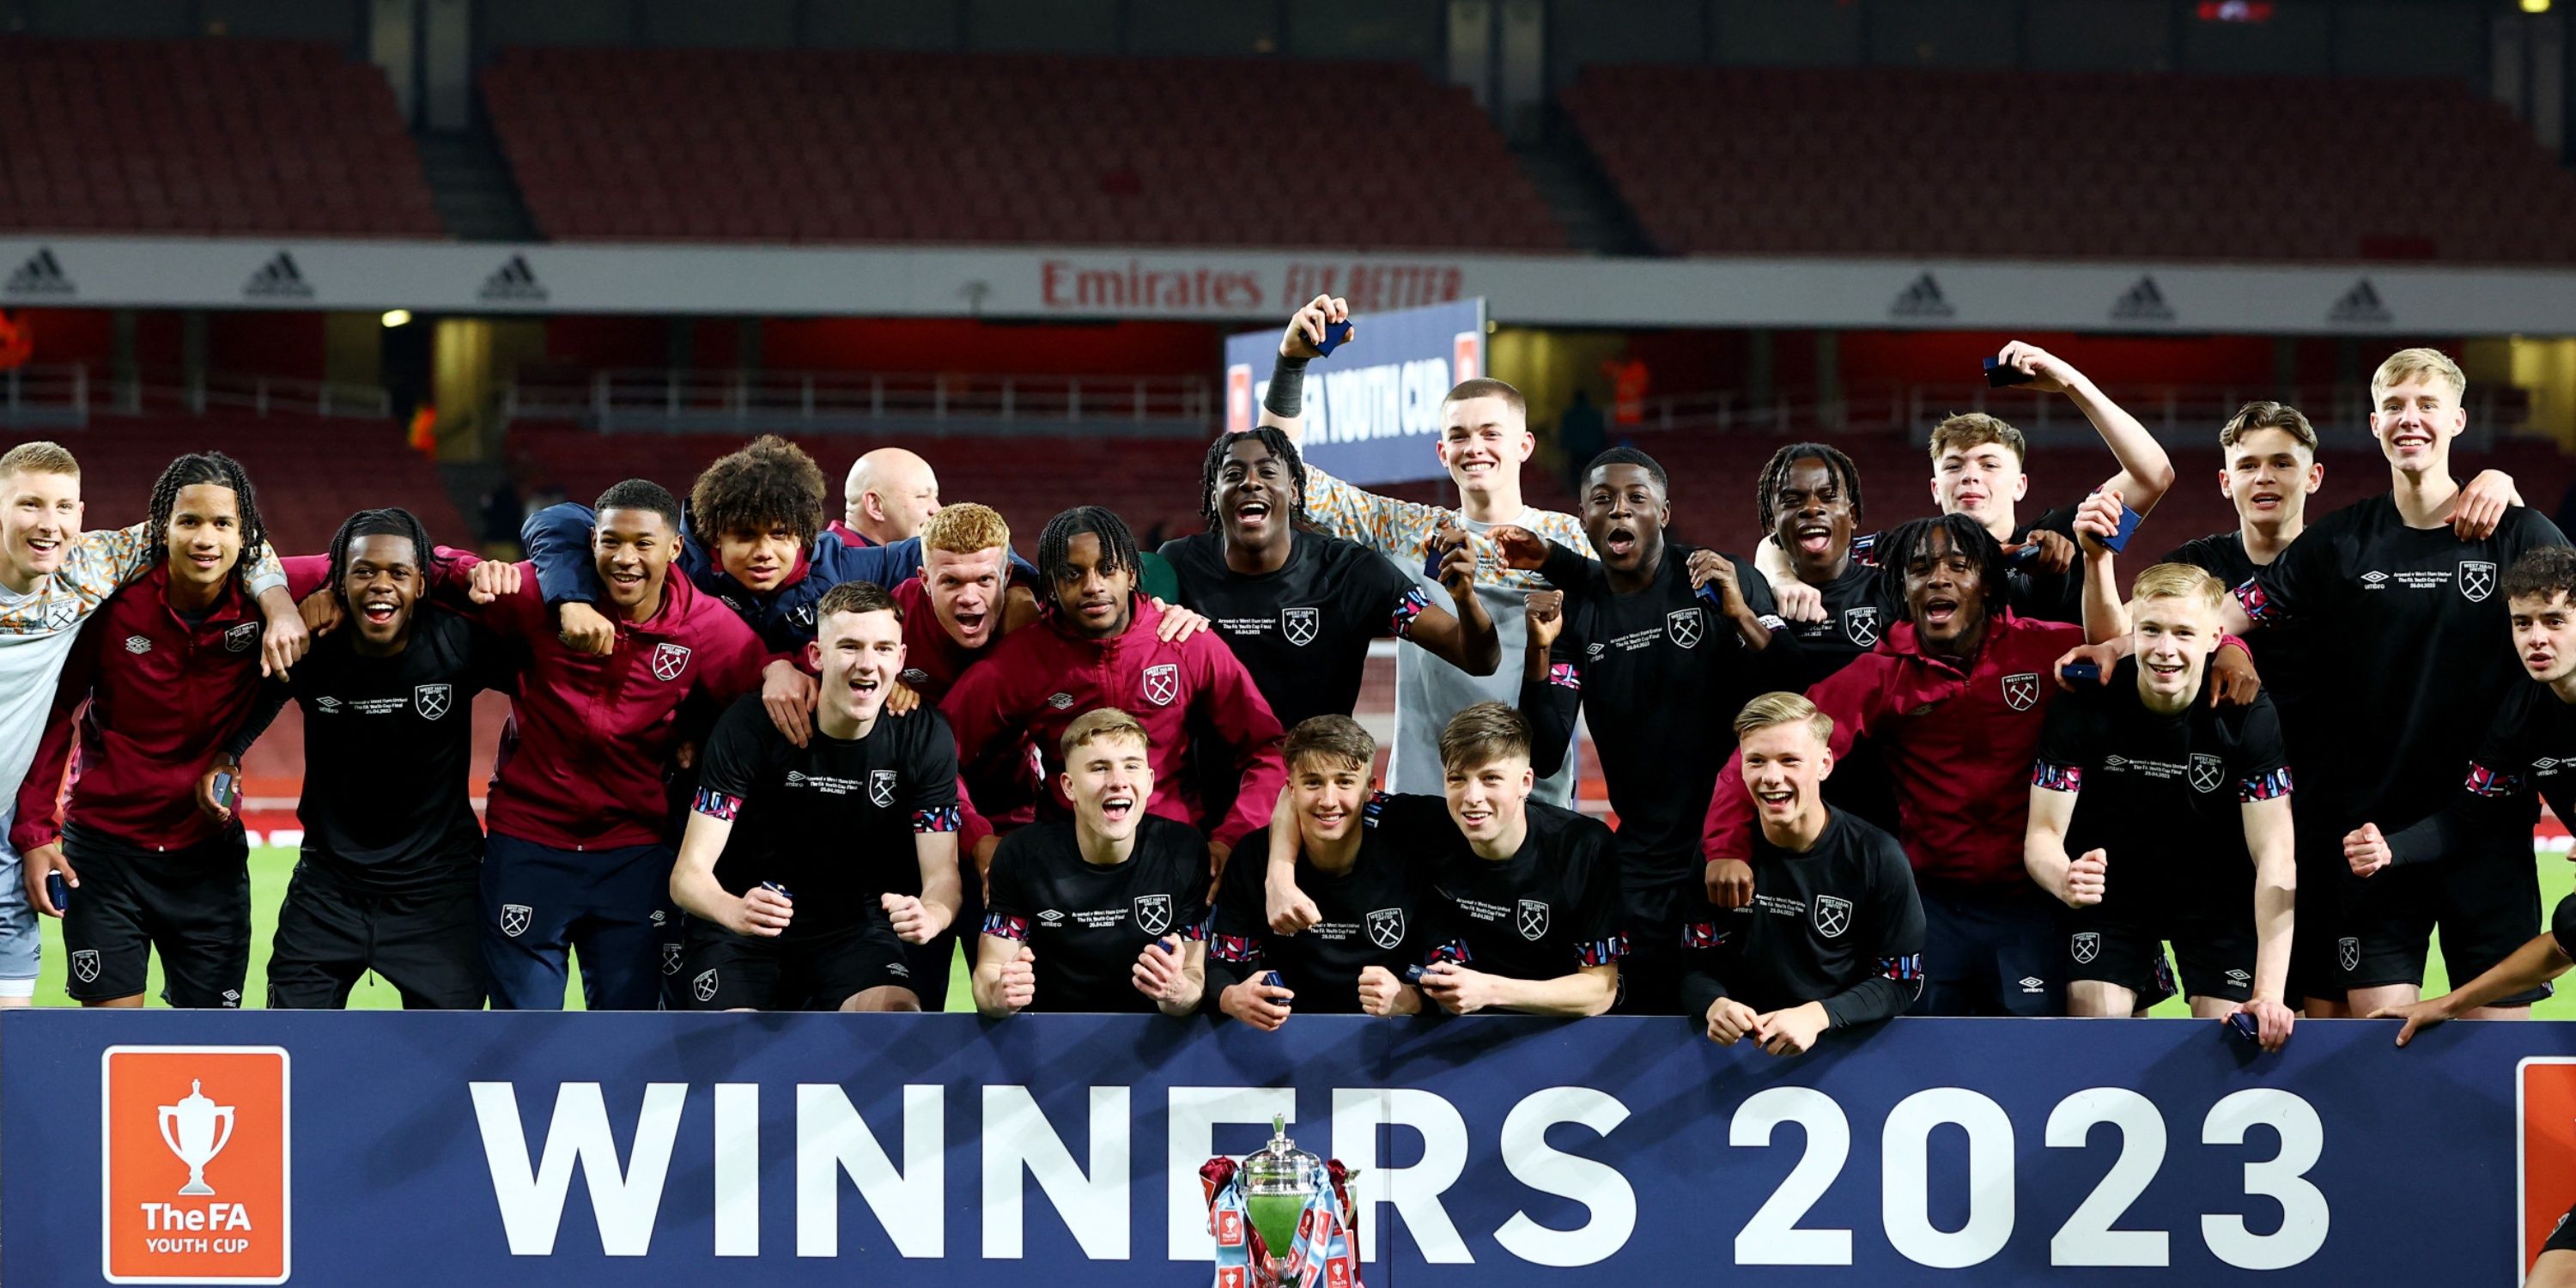 West-Ham-celebrating-the-FA-Youth-Cup